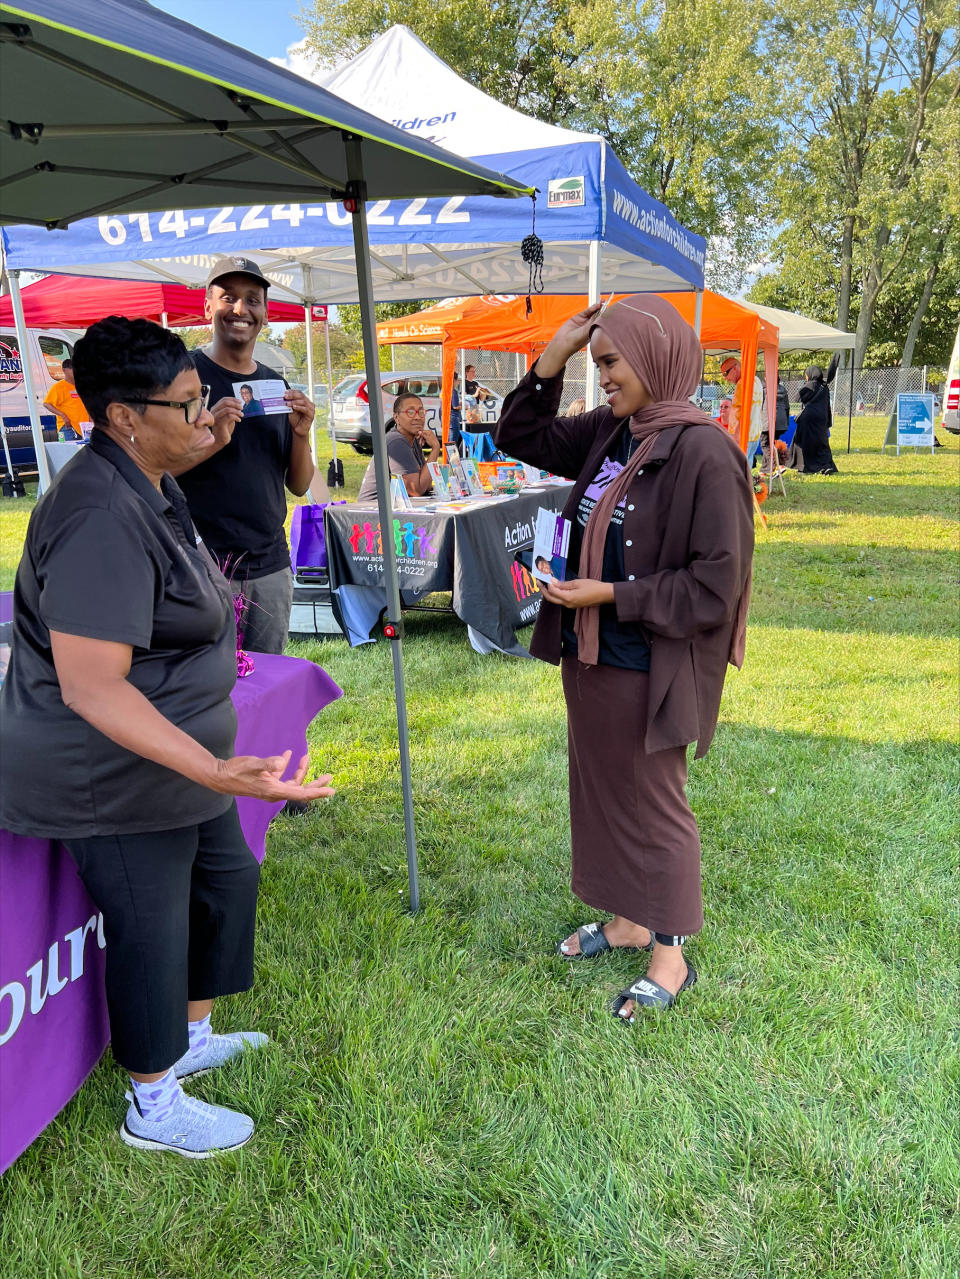 In this undated photo provided by Munira Abdullahi, right, the Democratic candidate running unopposed for the Ohio House of Representatives, chats with potential voters in her home city of Columbus, Ohio. The 26-year-old is all but guaranteed to become the first Somali woman and Muslim woman to serve in the Ohio Legislature. Columbus is home to the second-largest Somali population in the United States. (Munira Abdullahi via AP)